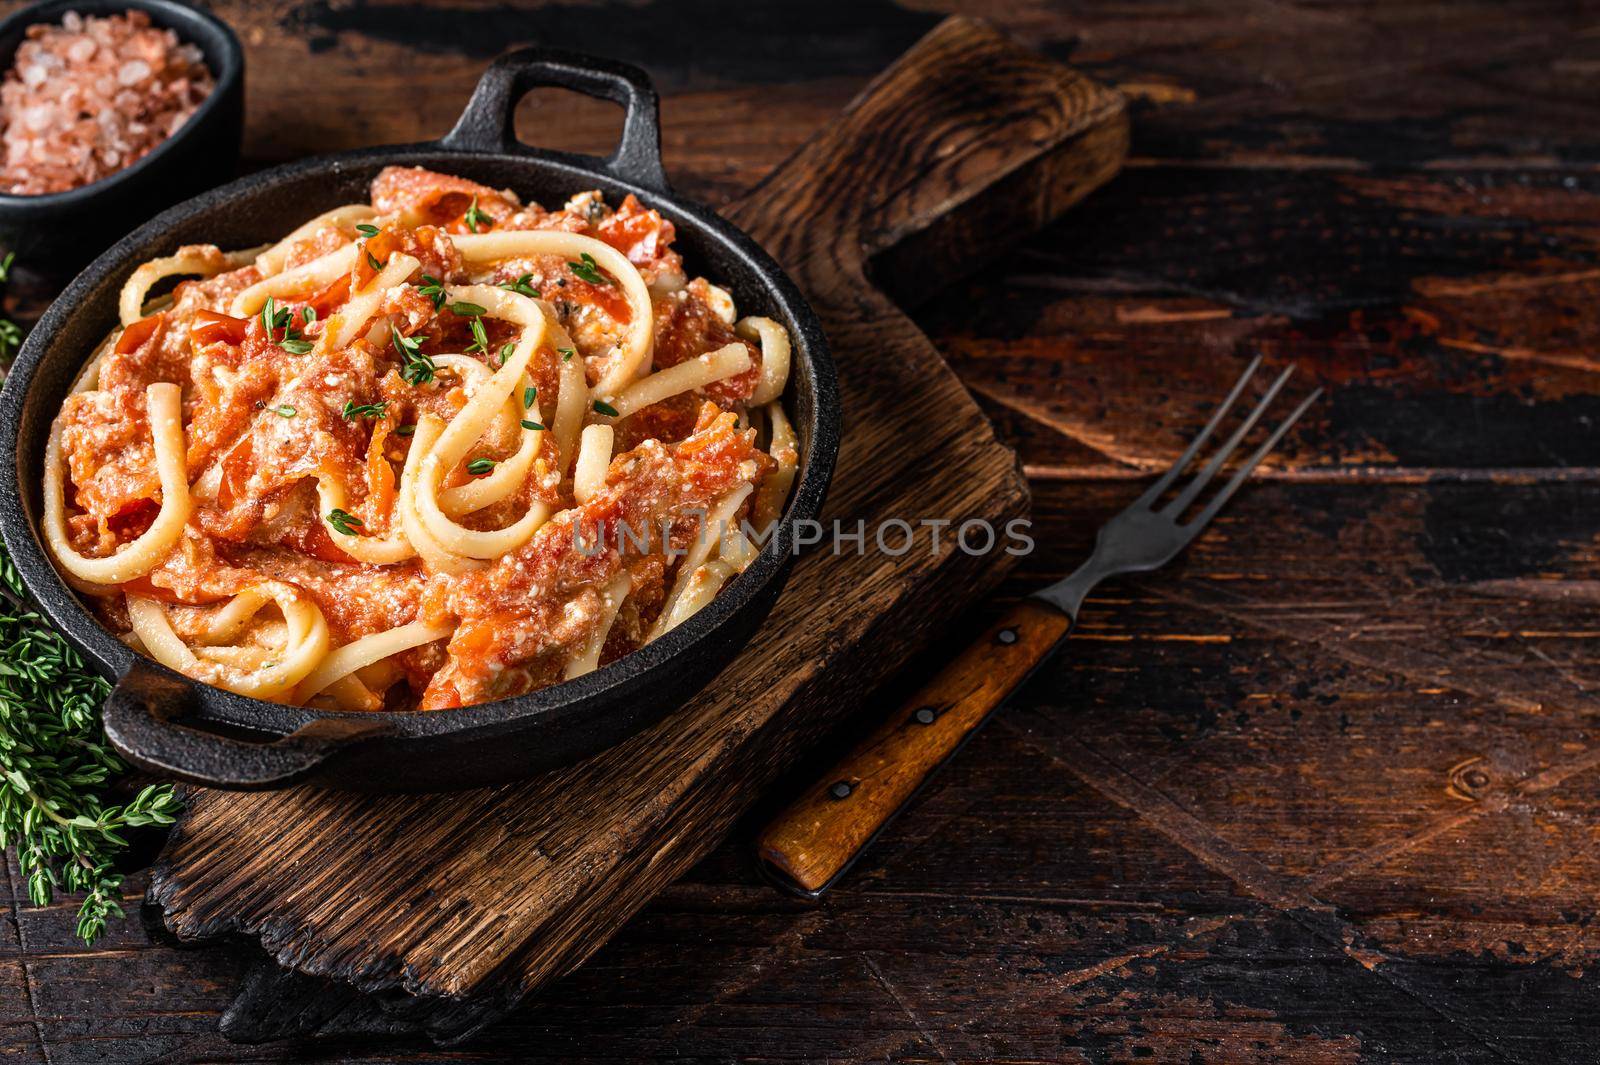 Trendy baked Feta pasta with Oven roasted tomatoes and cheese in a pan. Dark wooden background. Top view. Copy space.